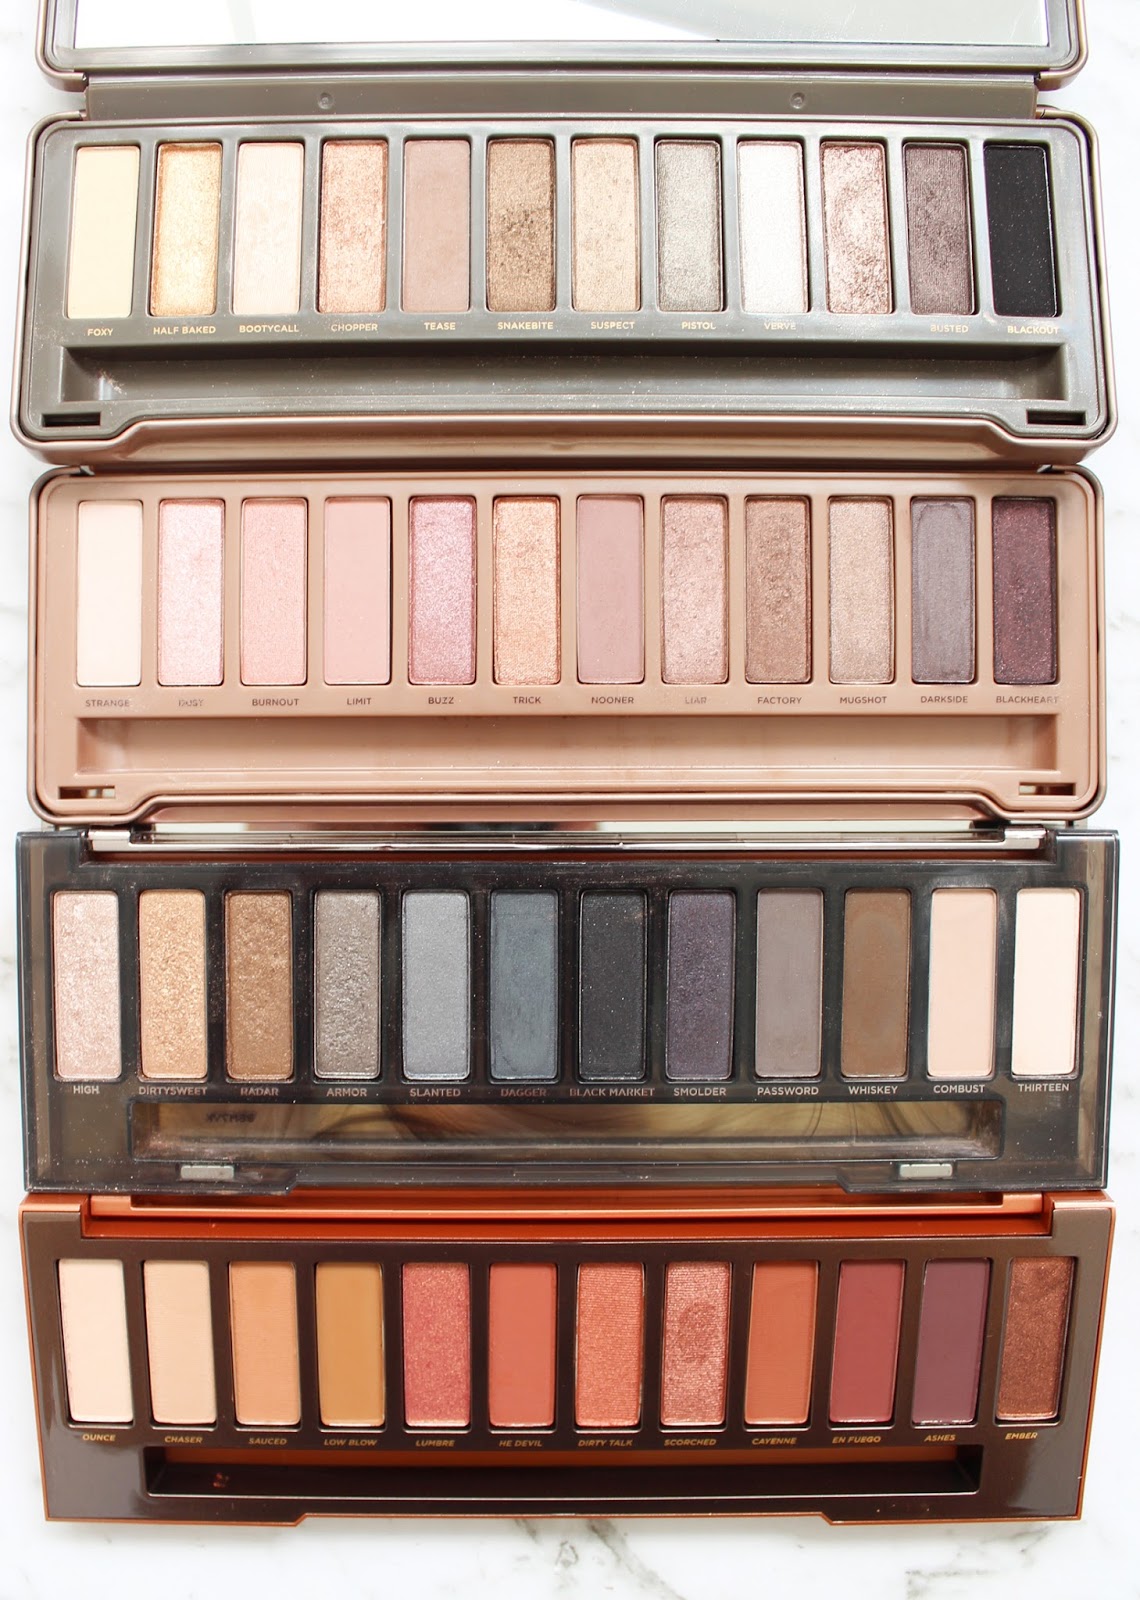 Urban Decay Naked Honey Palette Review + Swatches 